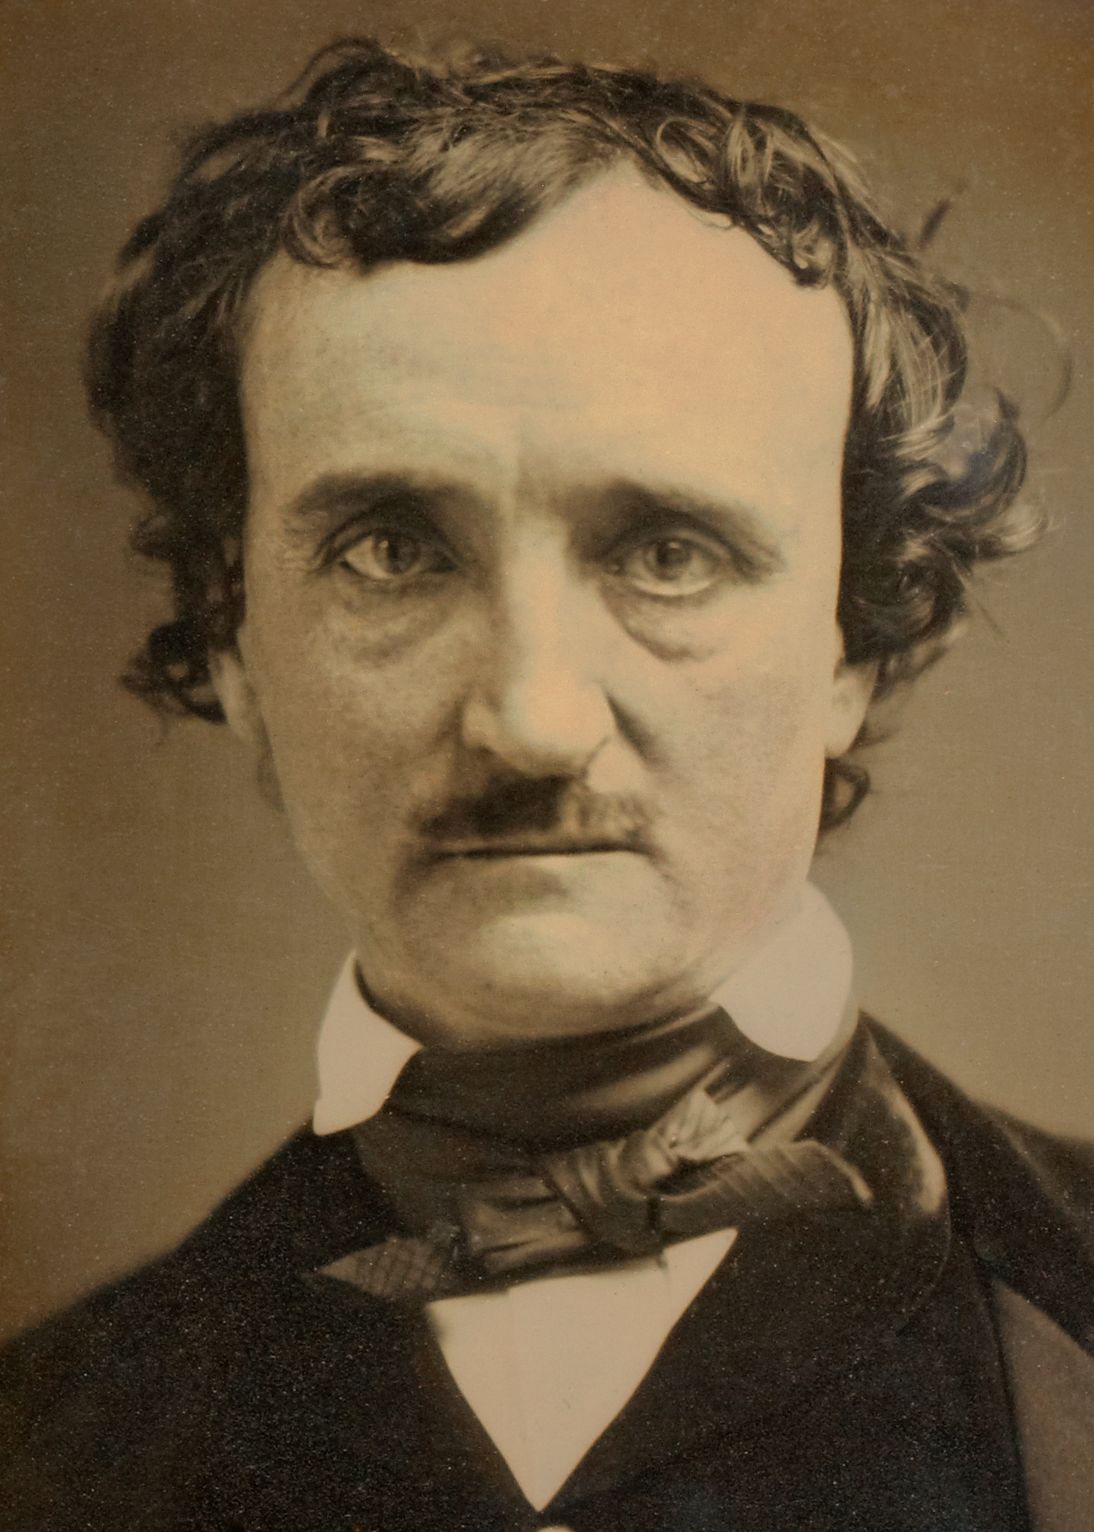 Poe knew where the dark side is—it lives inside us.